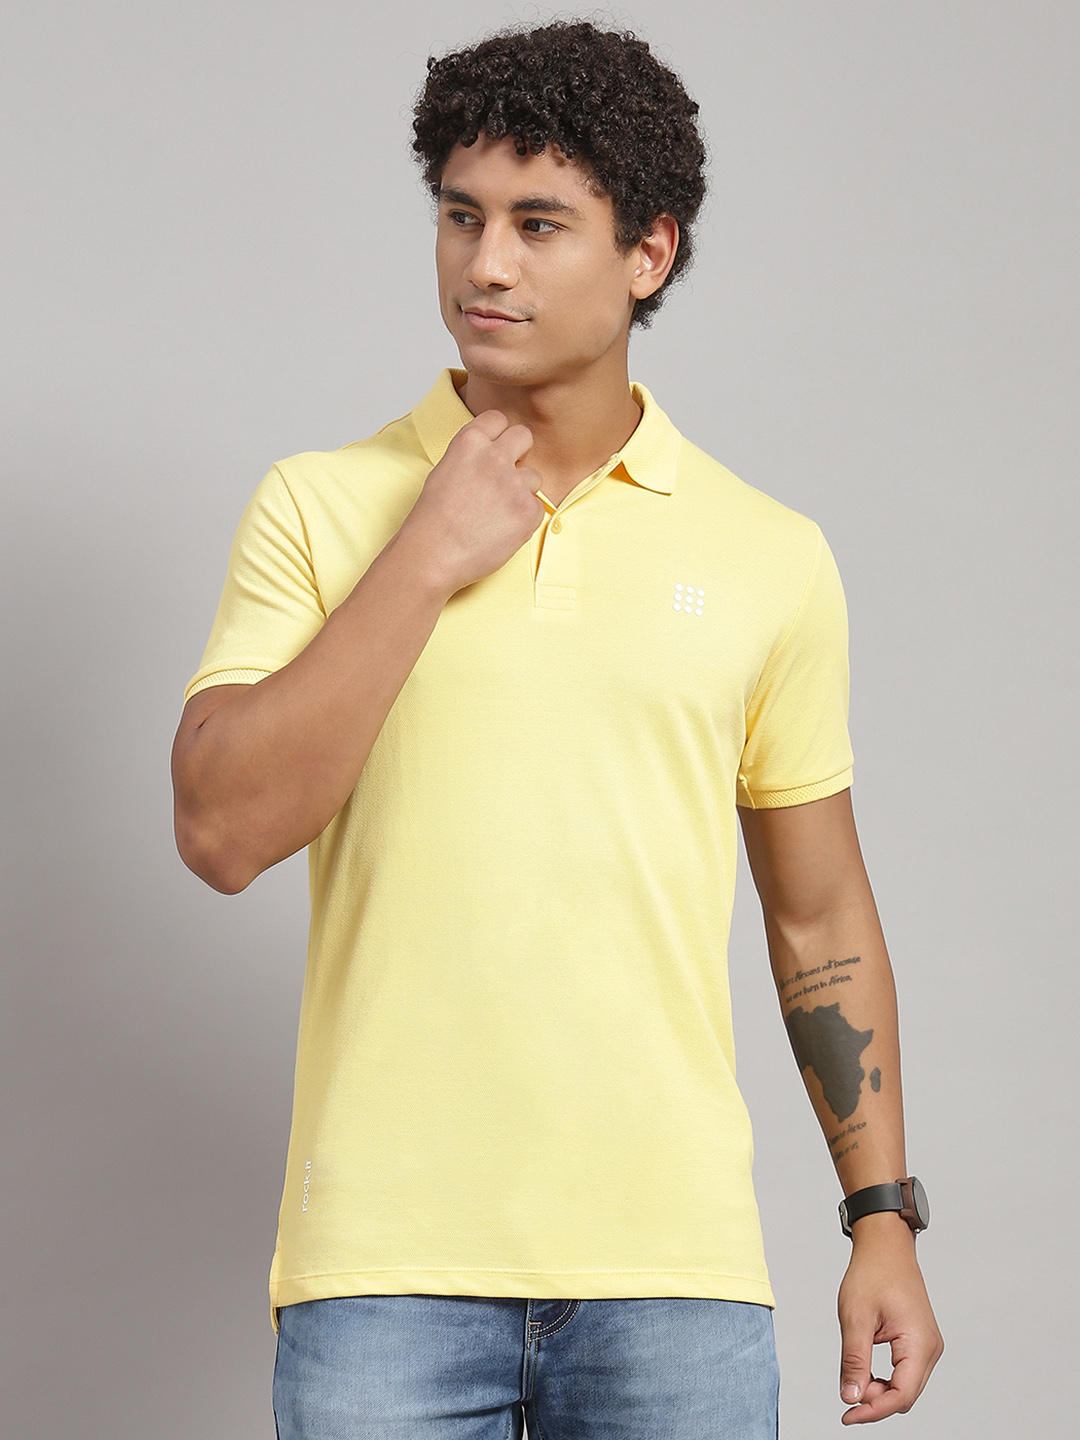 Rock.it Cotton Blend Yellow Solid T-Shirt